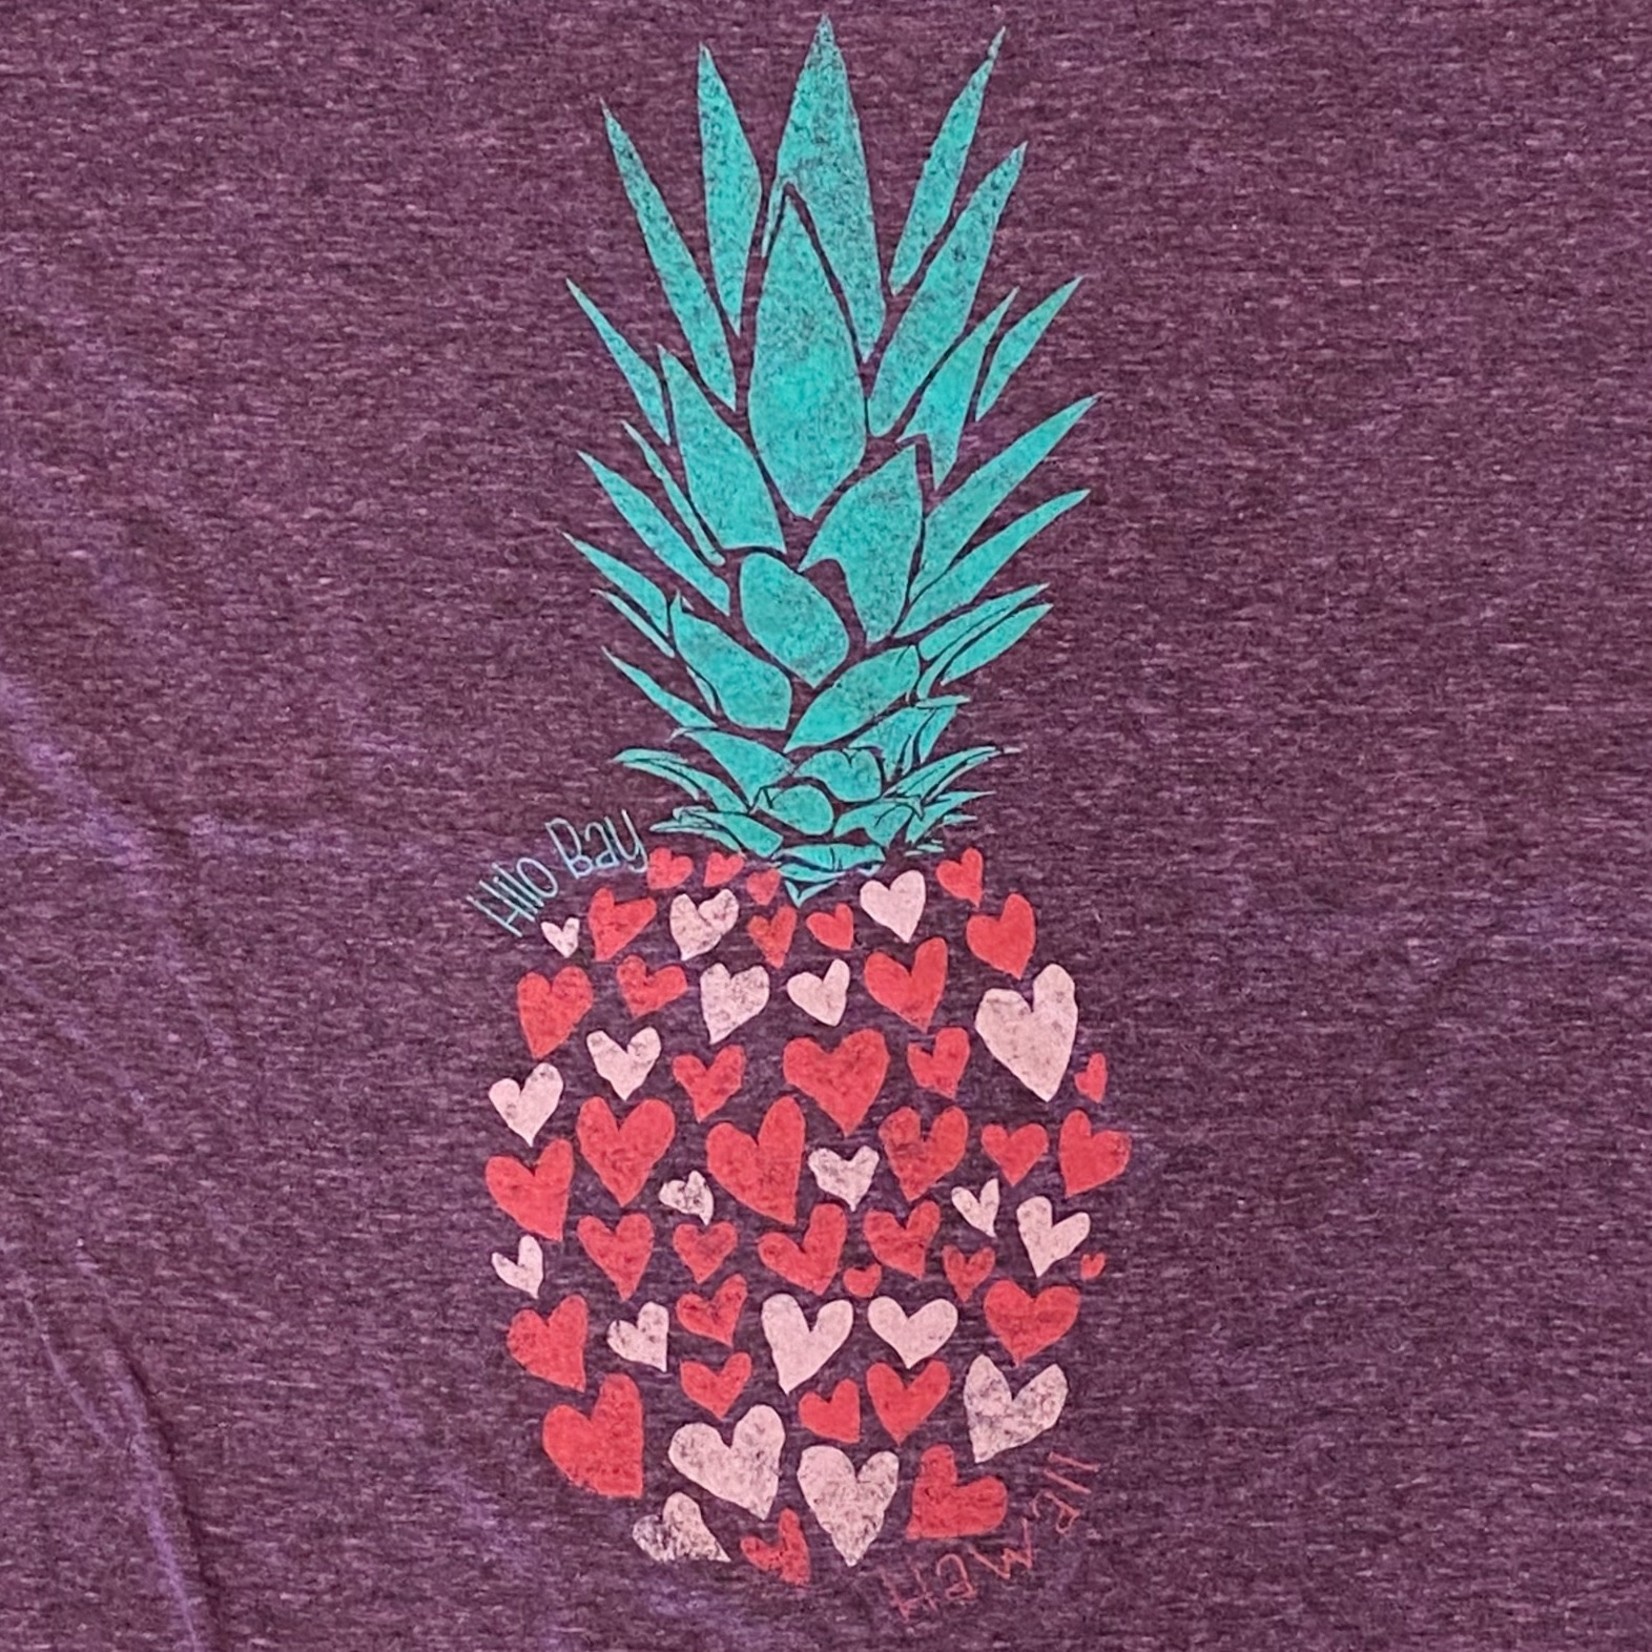 Blue 84 Reclaiming Pineapple Hearts Ladies T-shirt